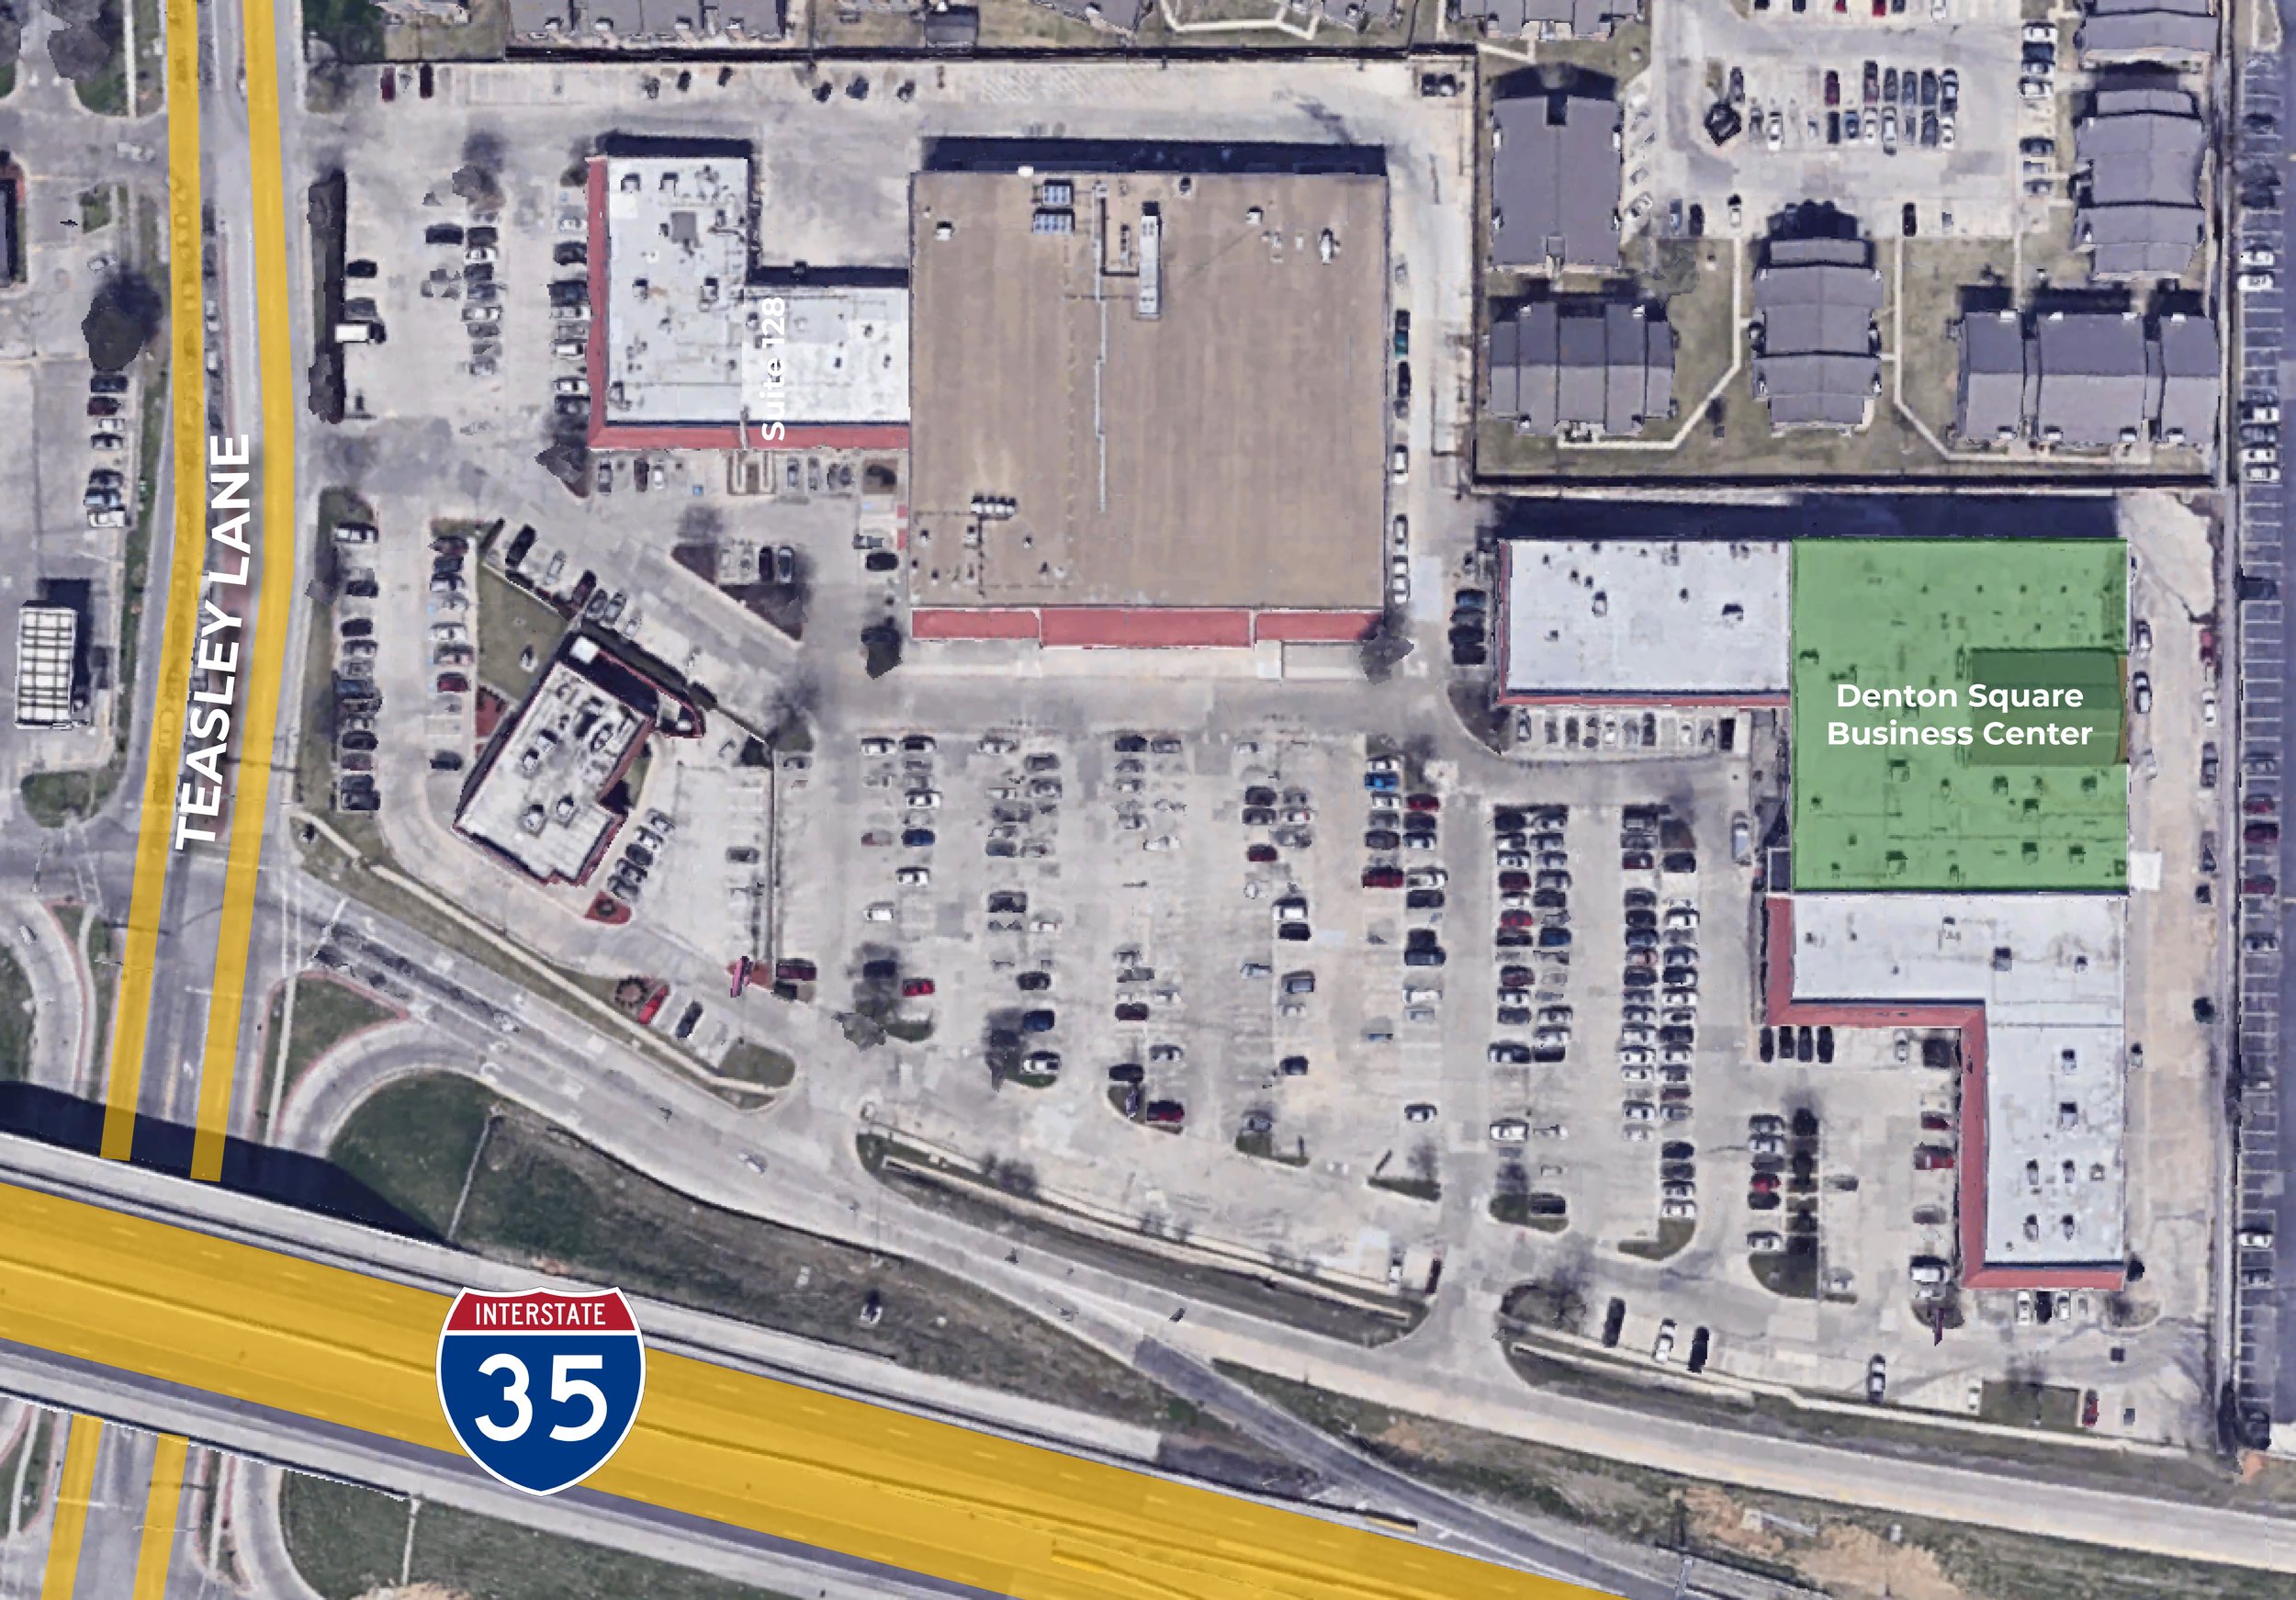  top down view of the shopping area Denton Square Business Center is at with its building dimensions highlighted in green 